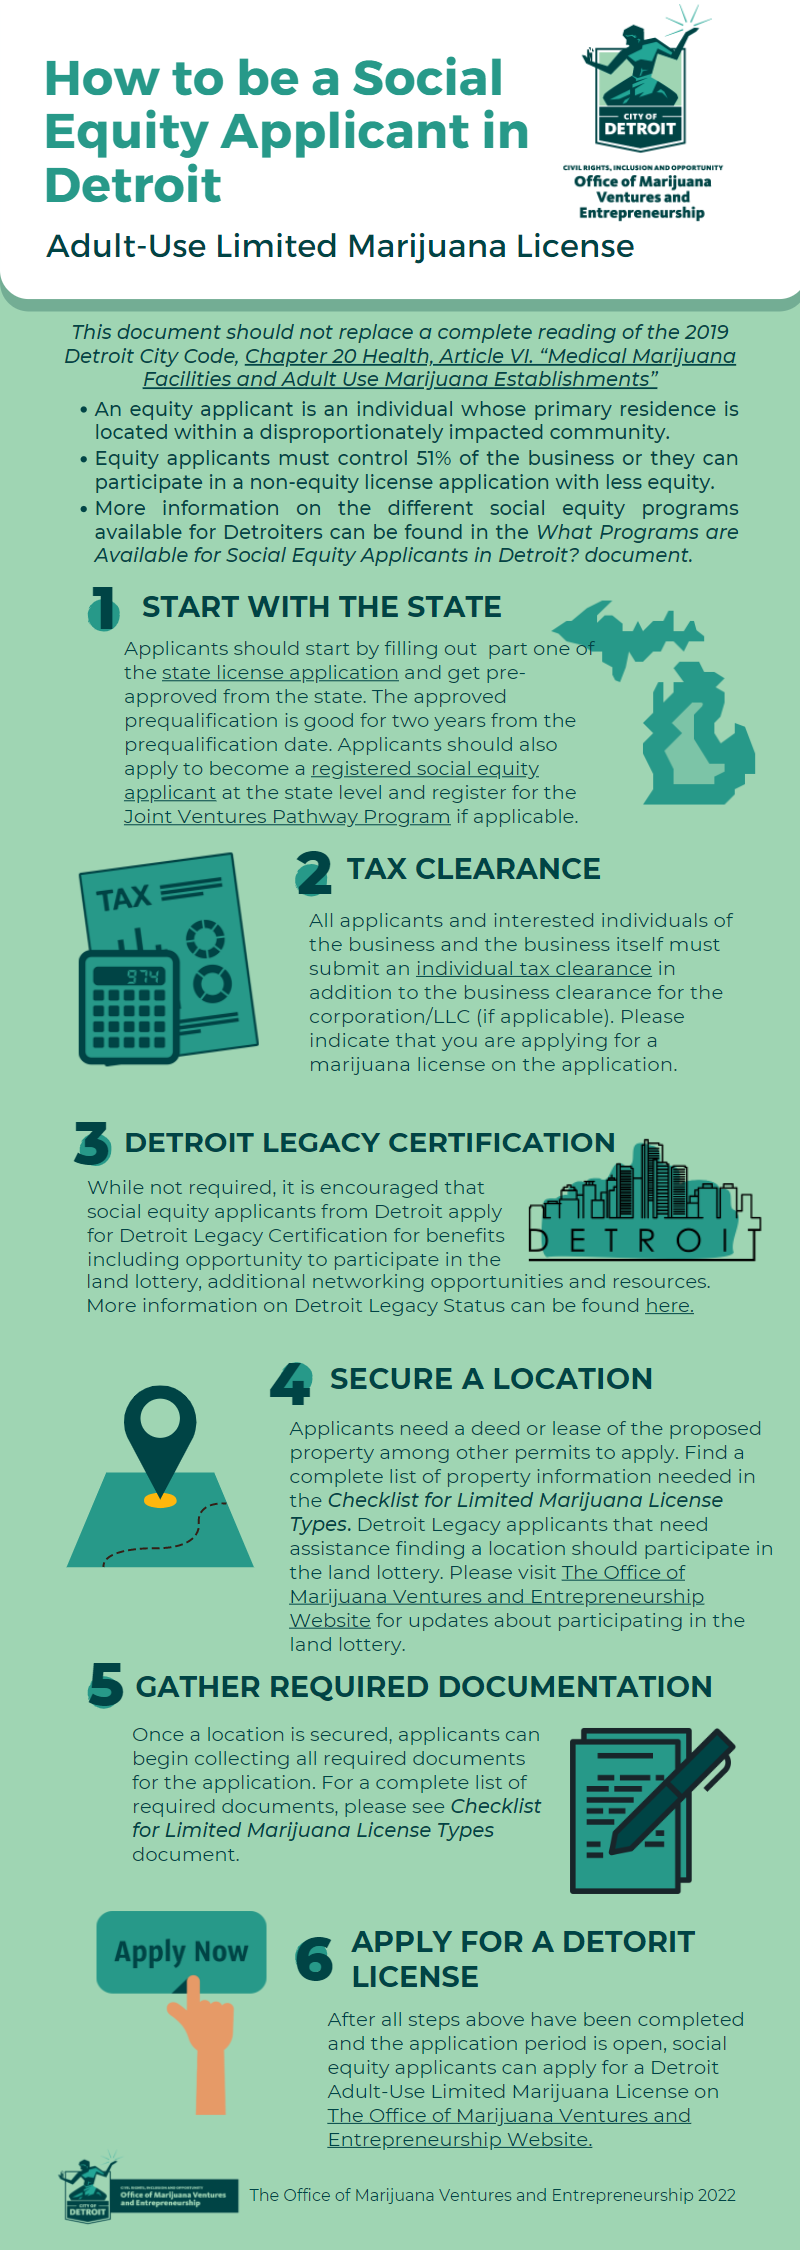 How to be a Social Equity Applicant in Detroit